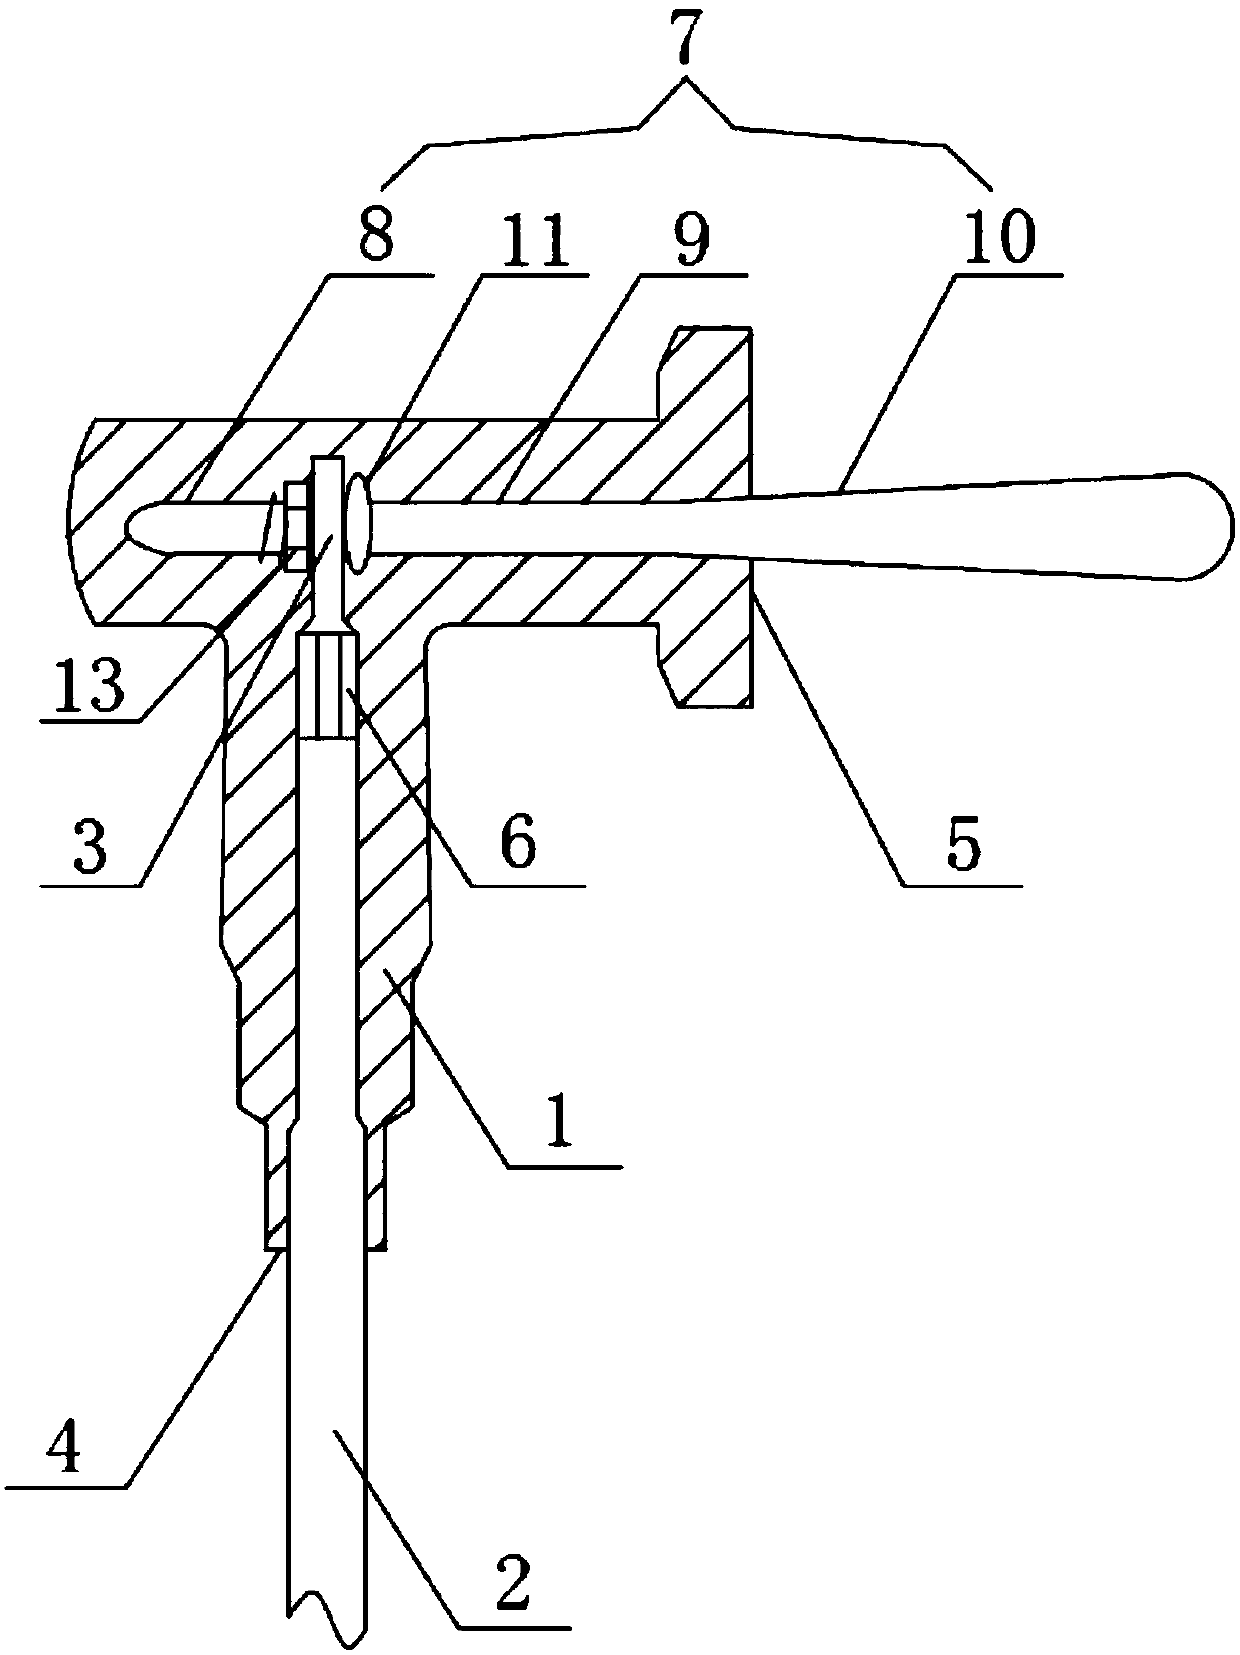 Elbow-shaped cable terminal extension rod